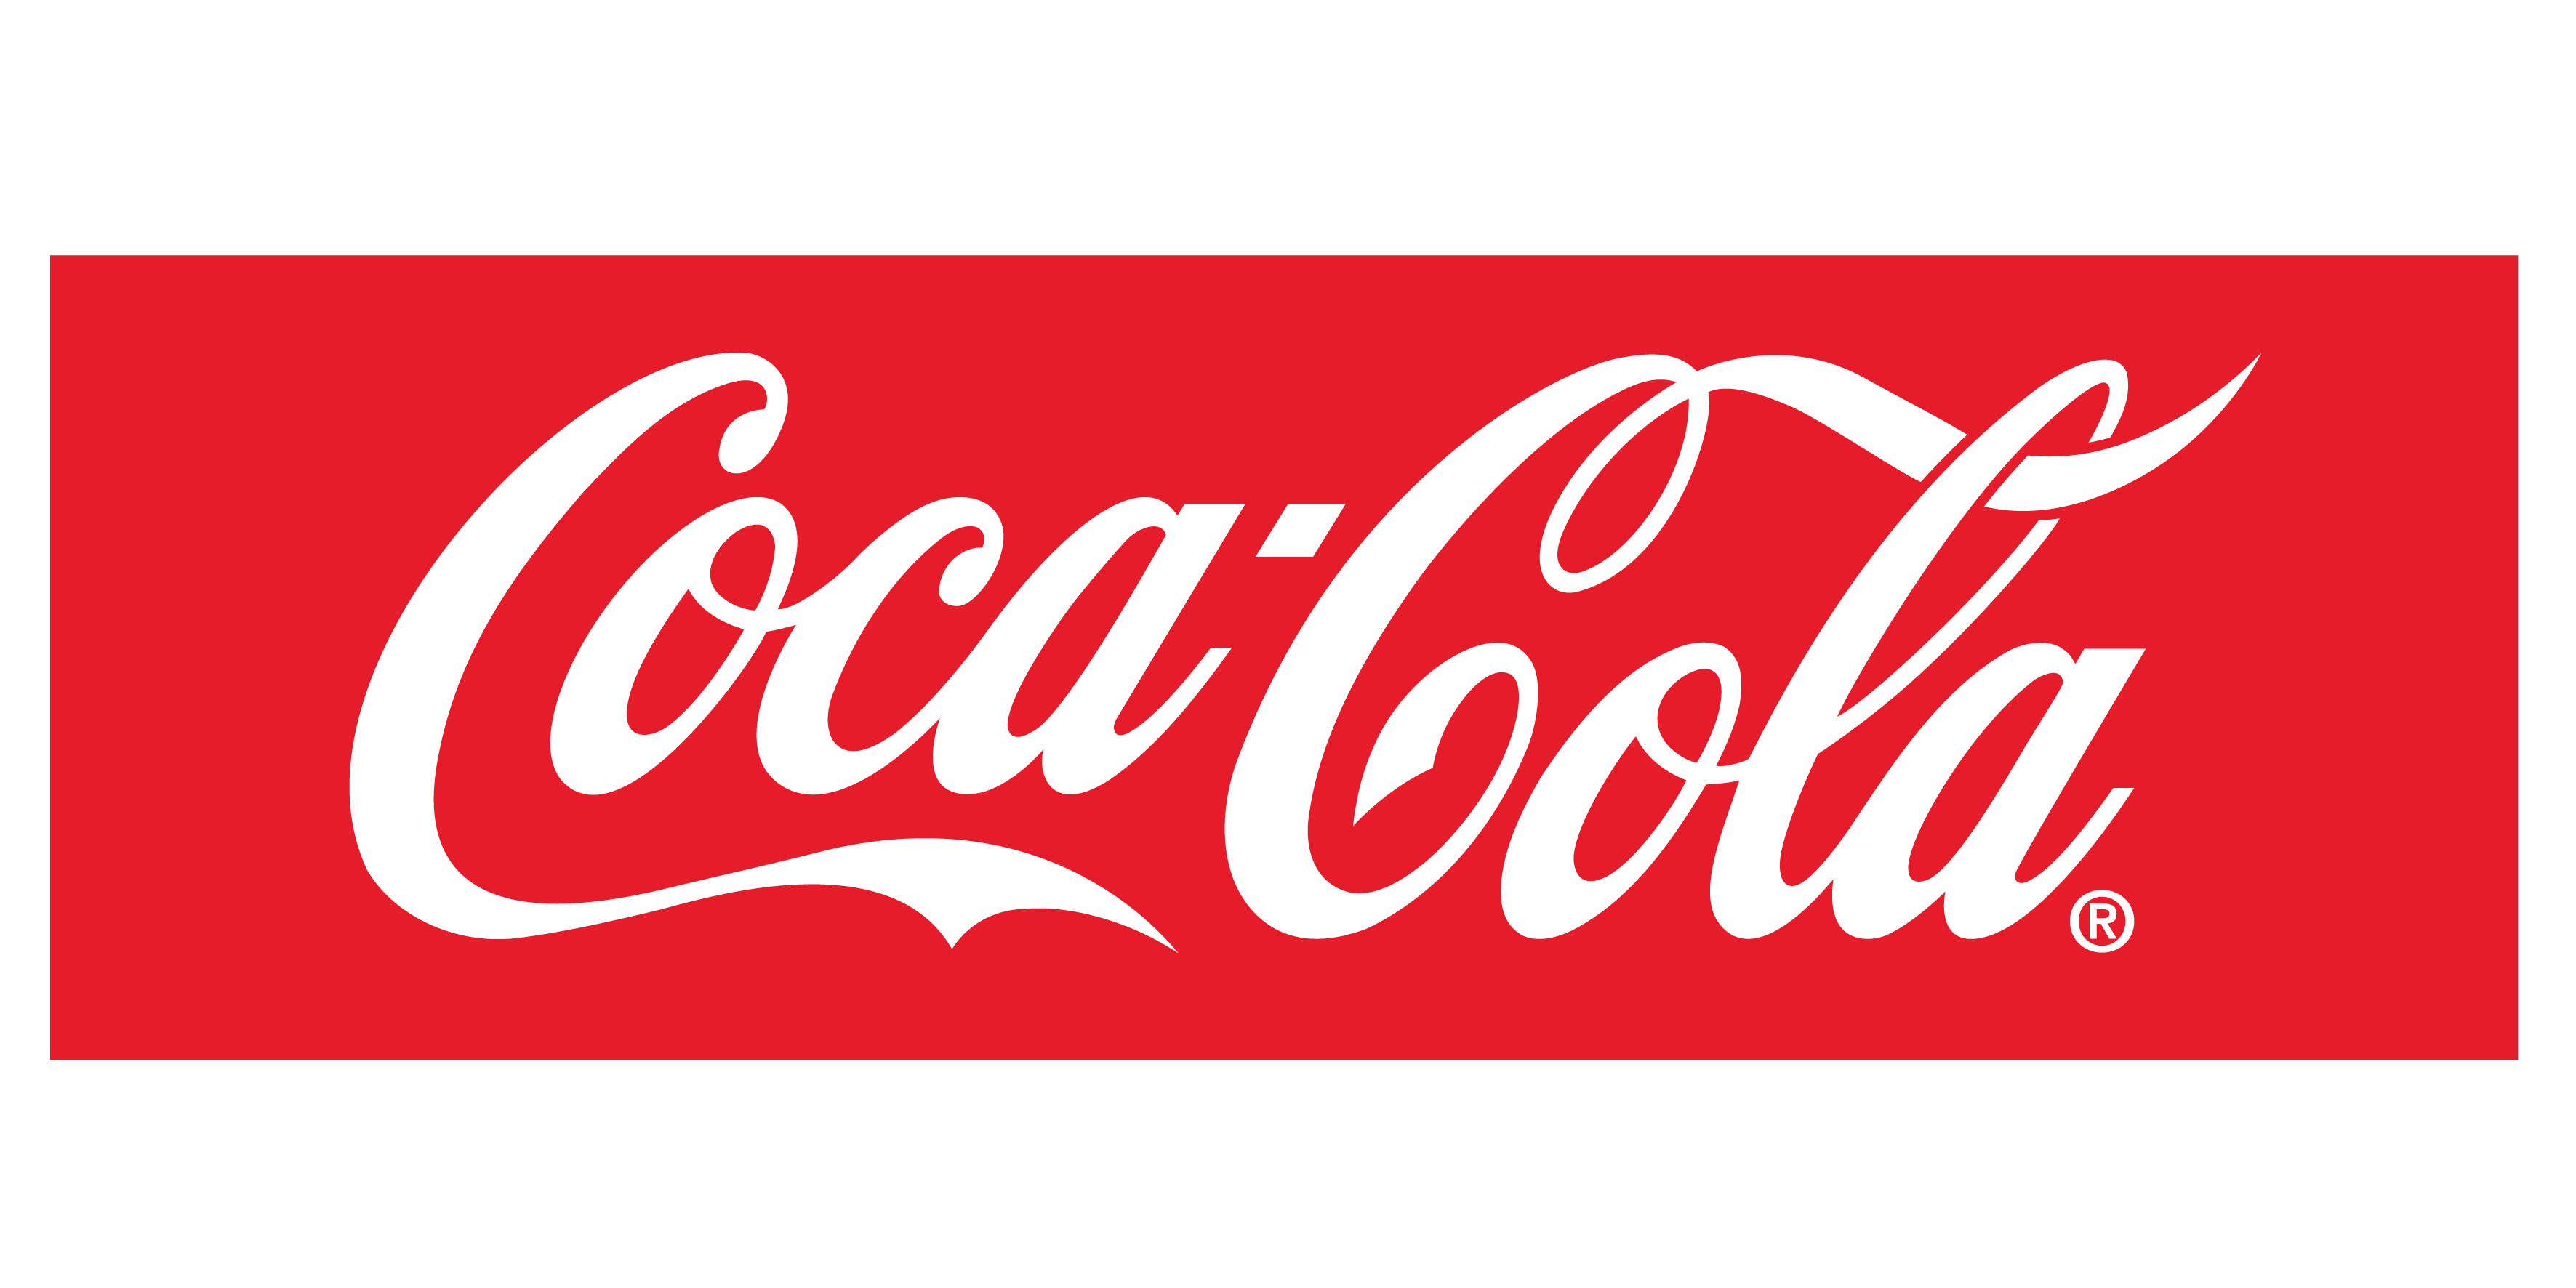 Nice Images Collection: Coca Cola Desktop Wallpapers